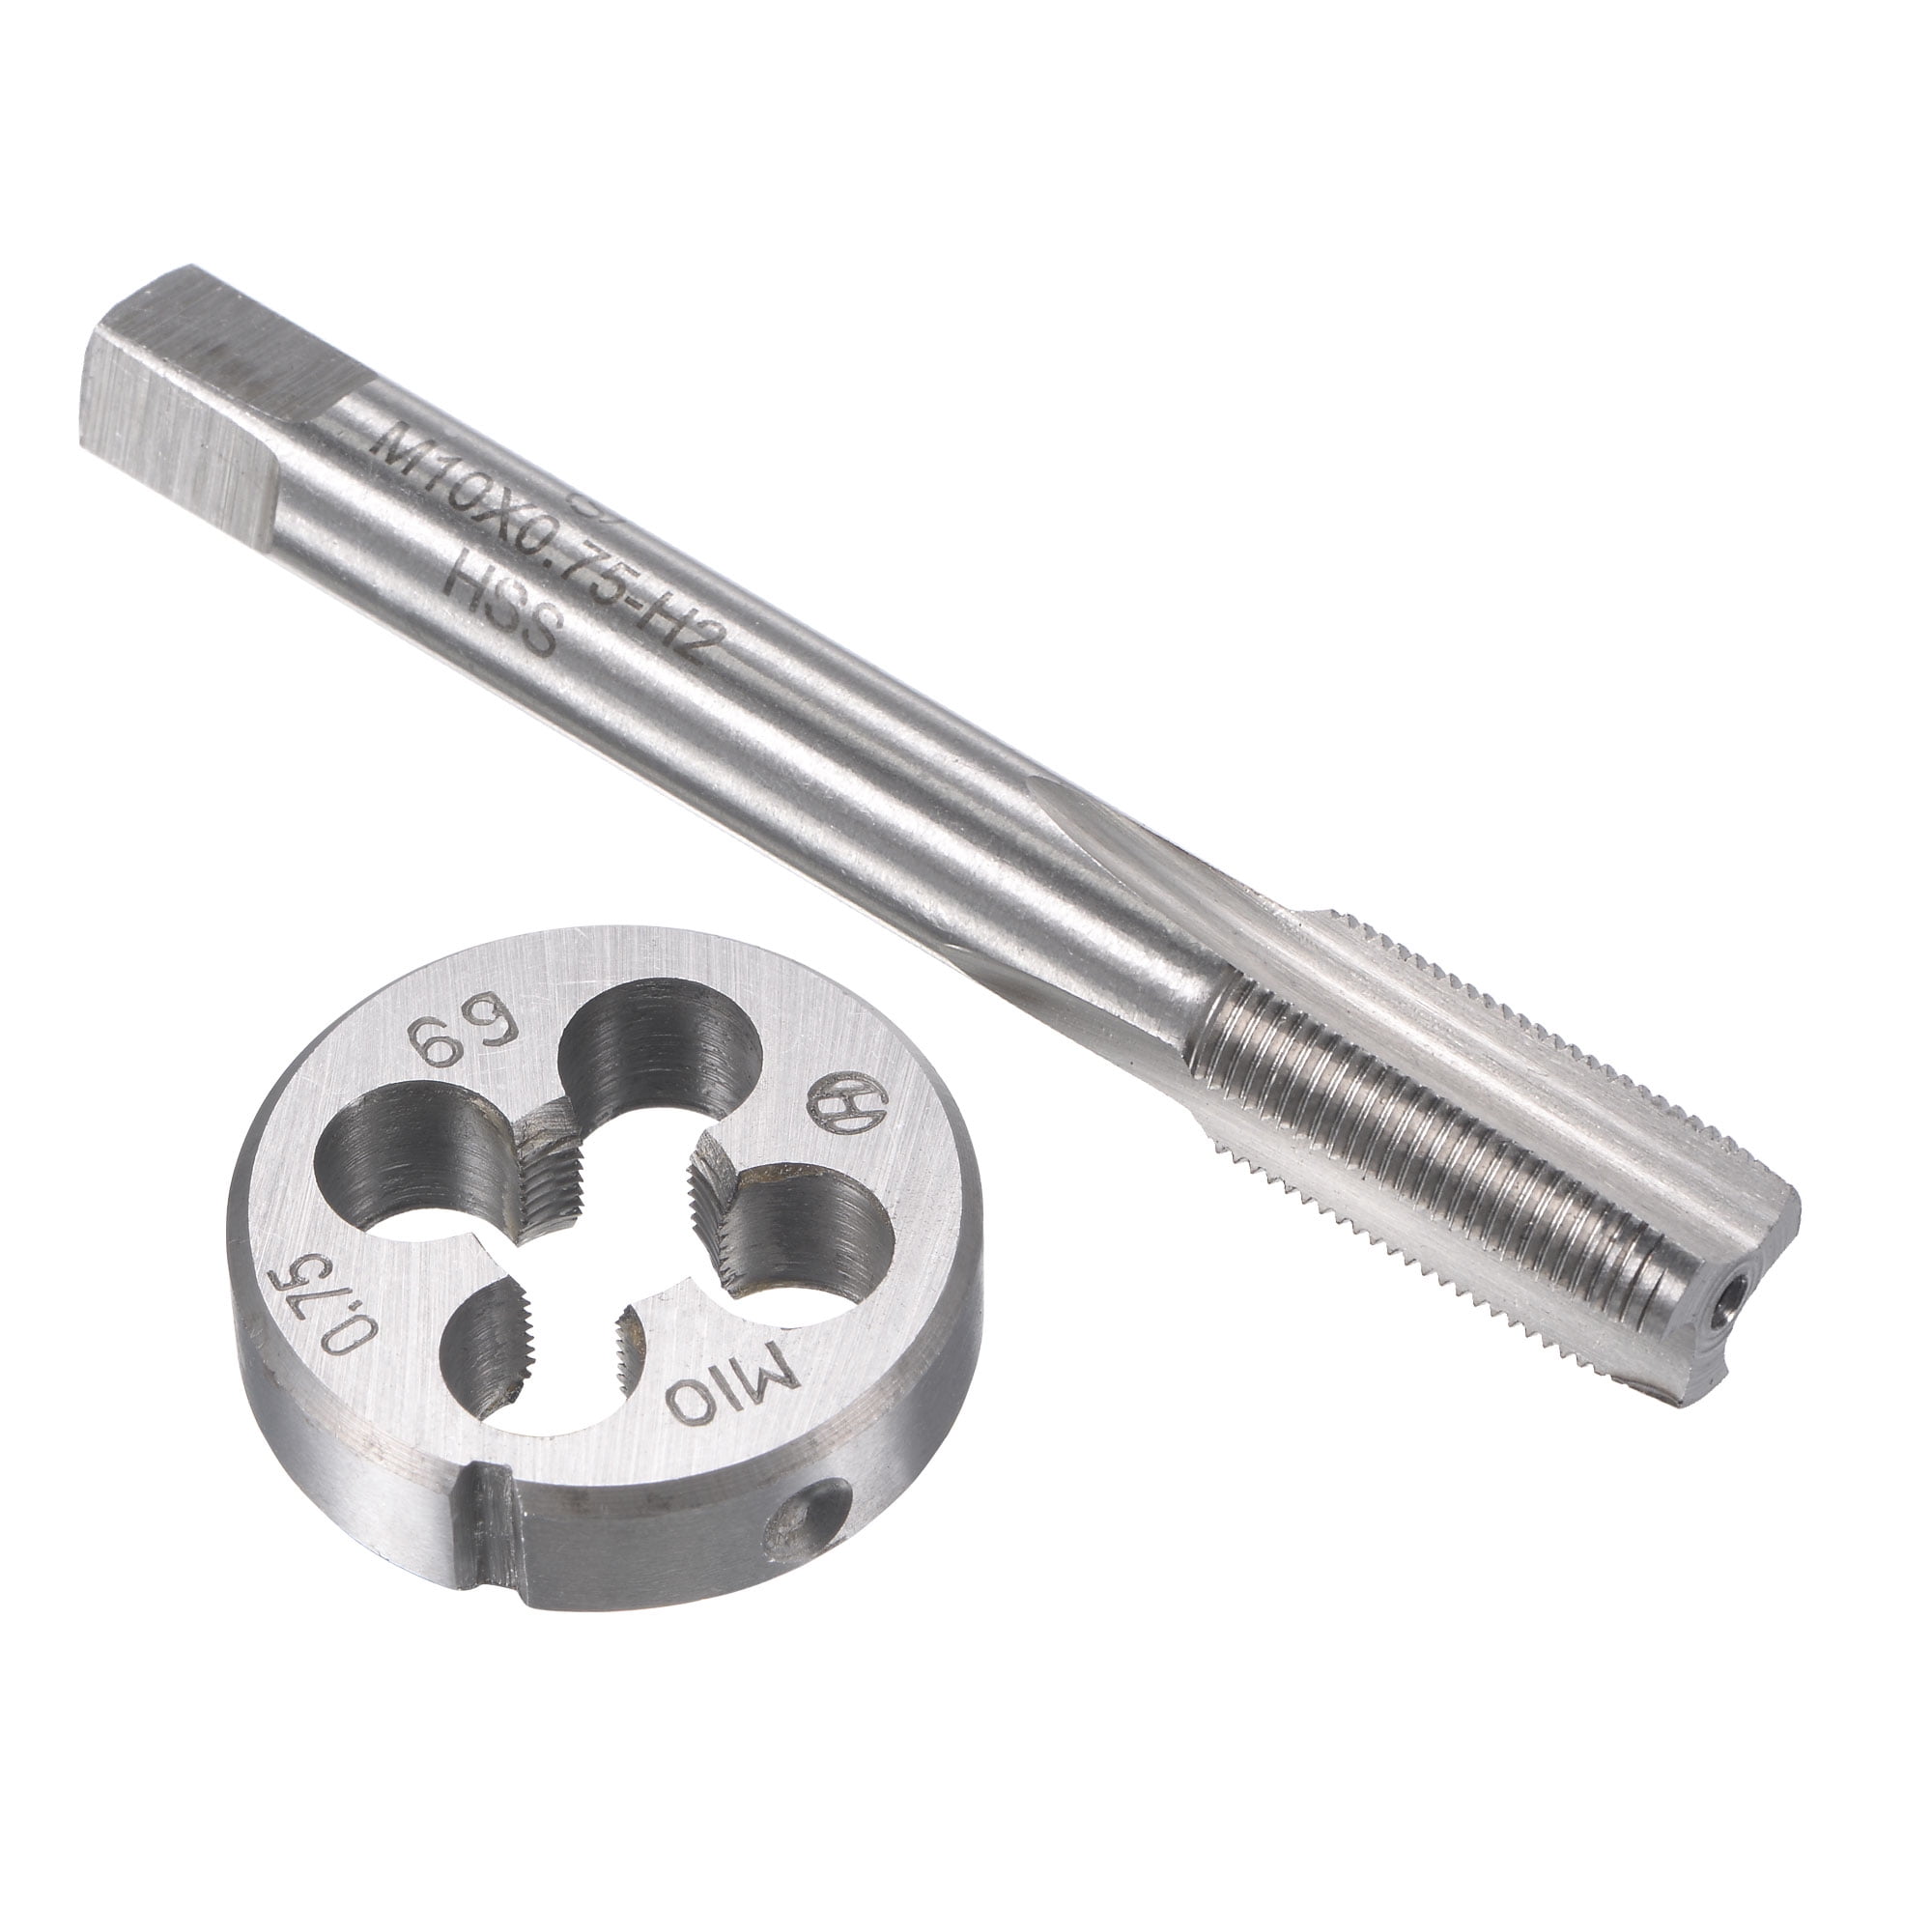 Uxcell Metric Tap and Die Set Machine Thread Screw Tap with